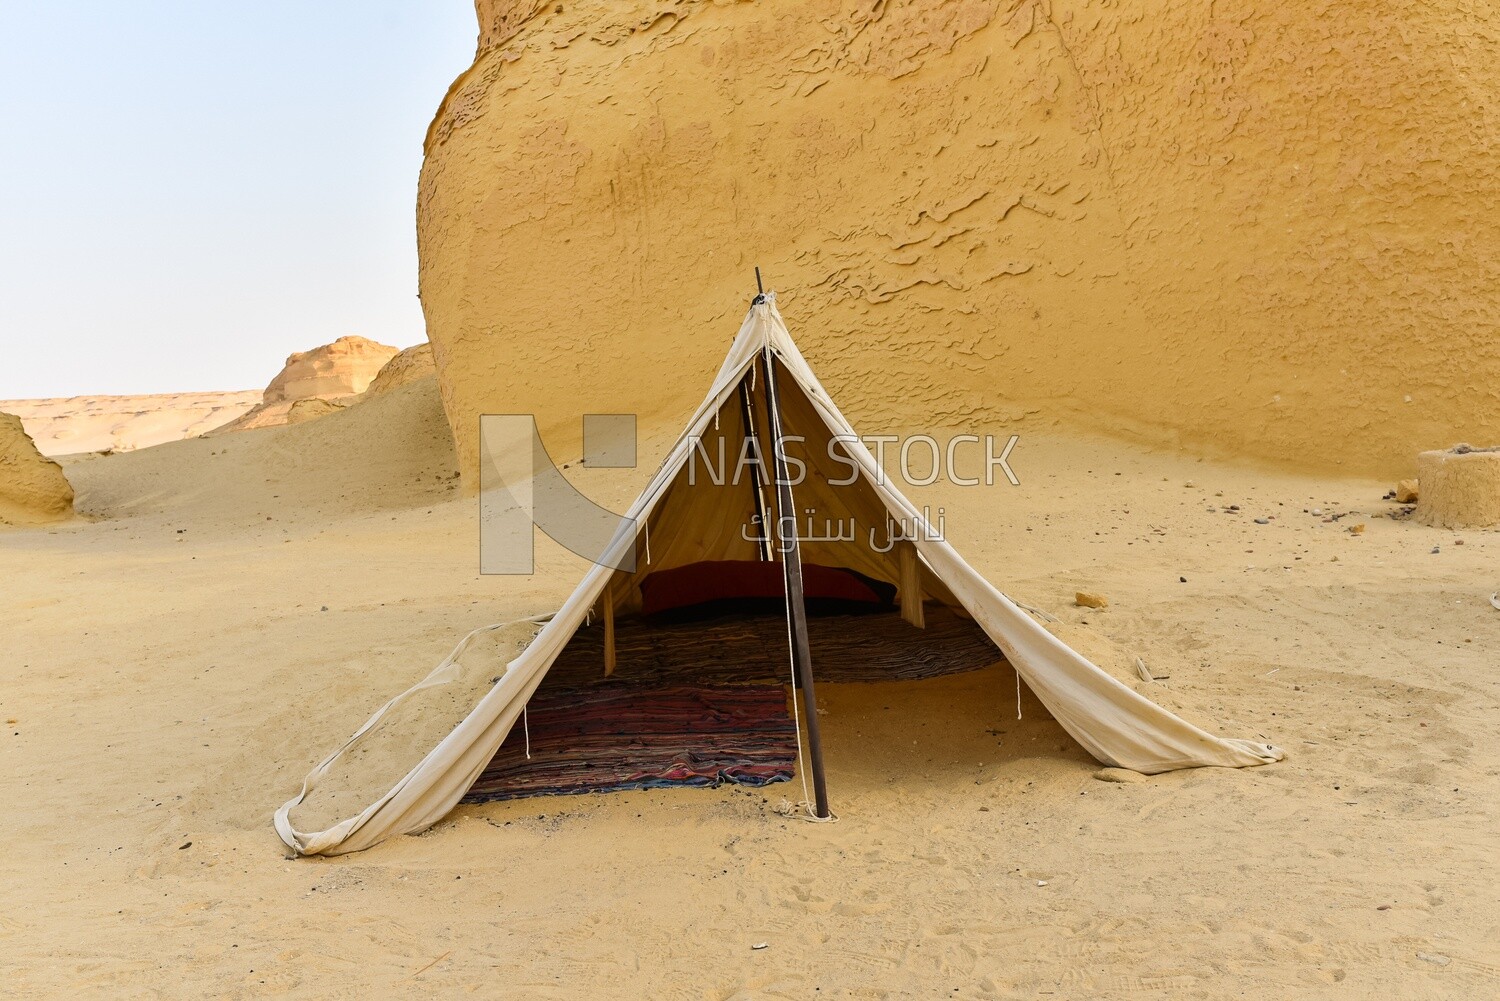 A scene of a Bedouin tent among the mountains in Wadi El Hitan, Egypt